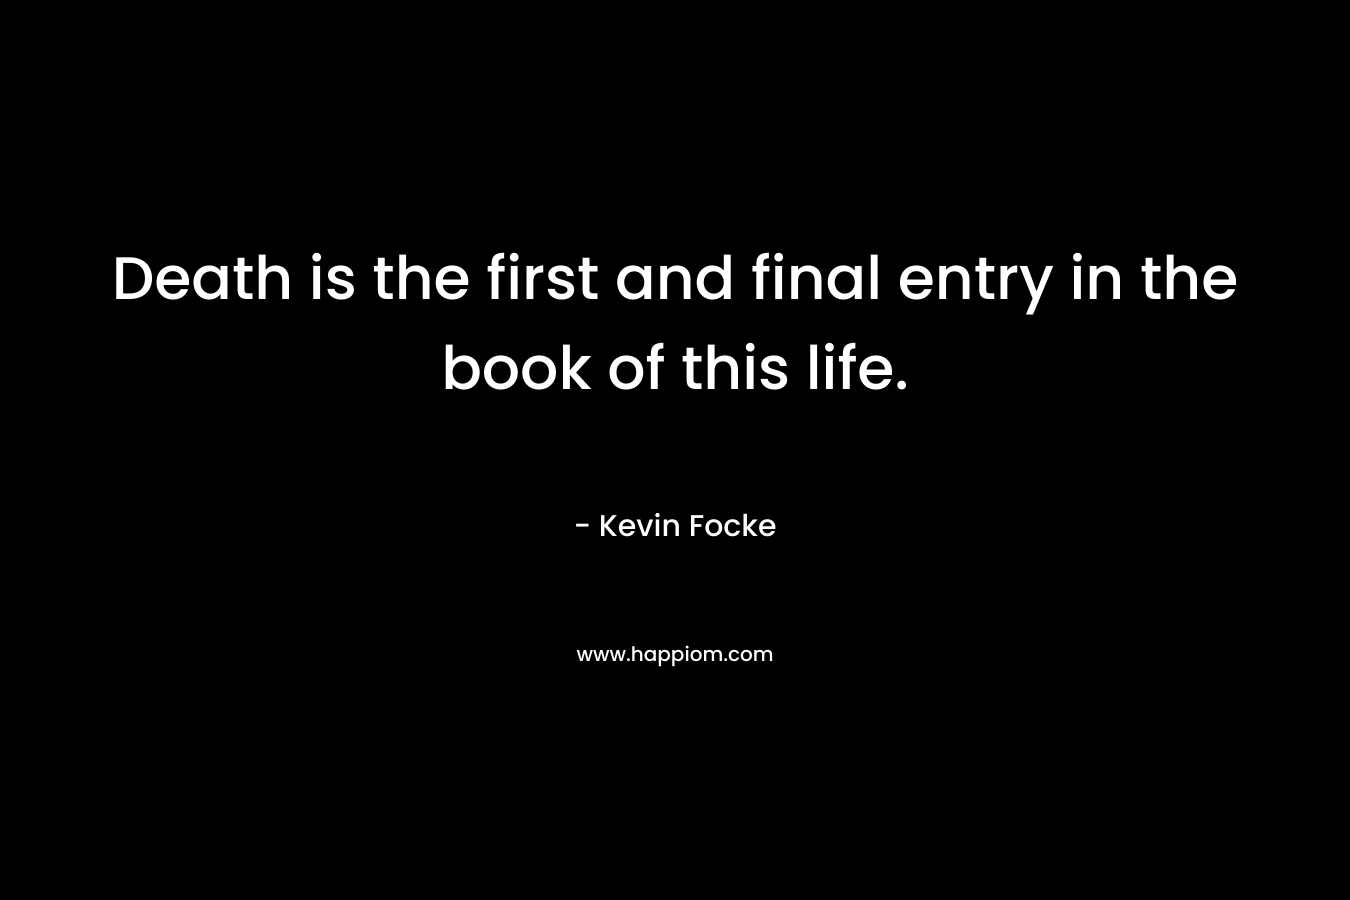 Death is the first and final entry in the book of this life. – Kevin Focke